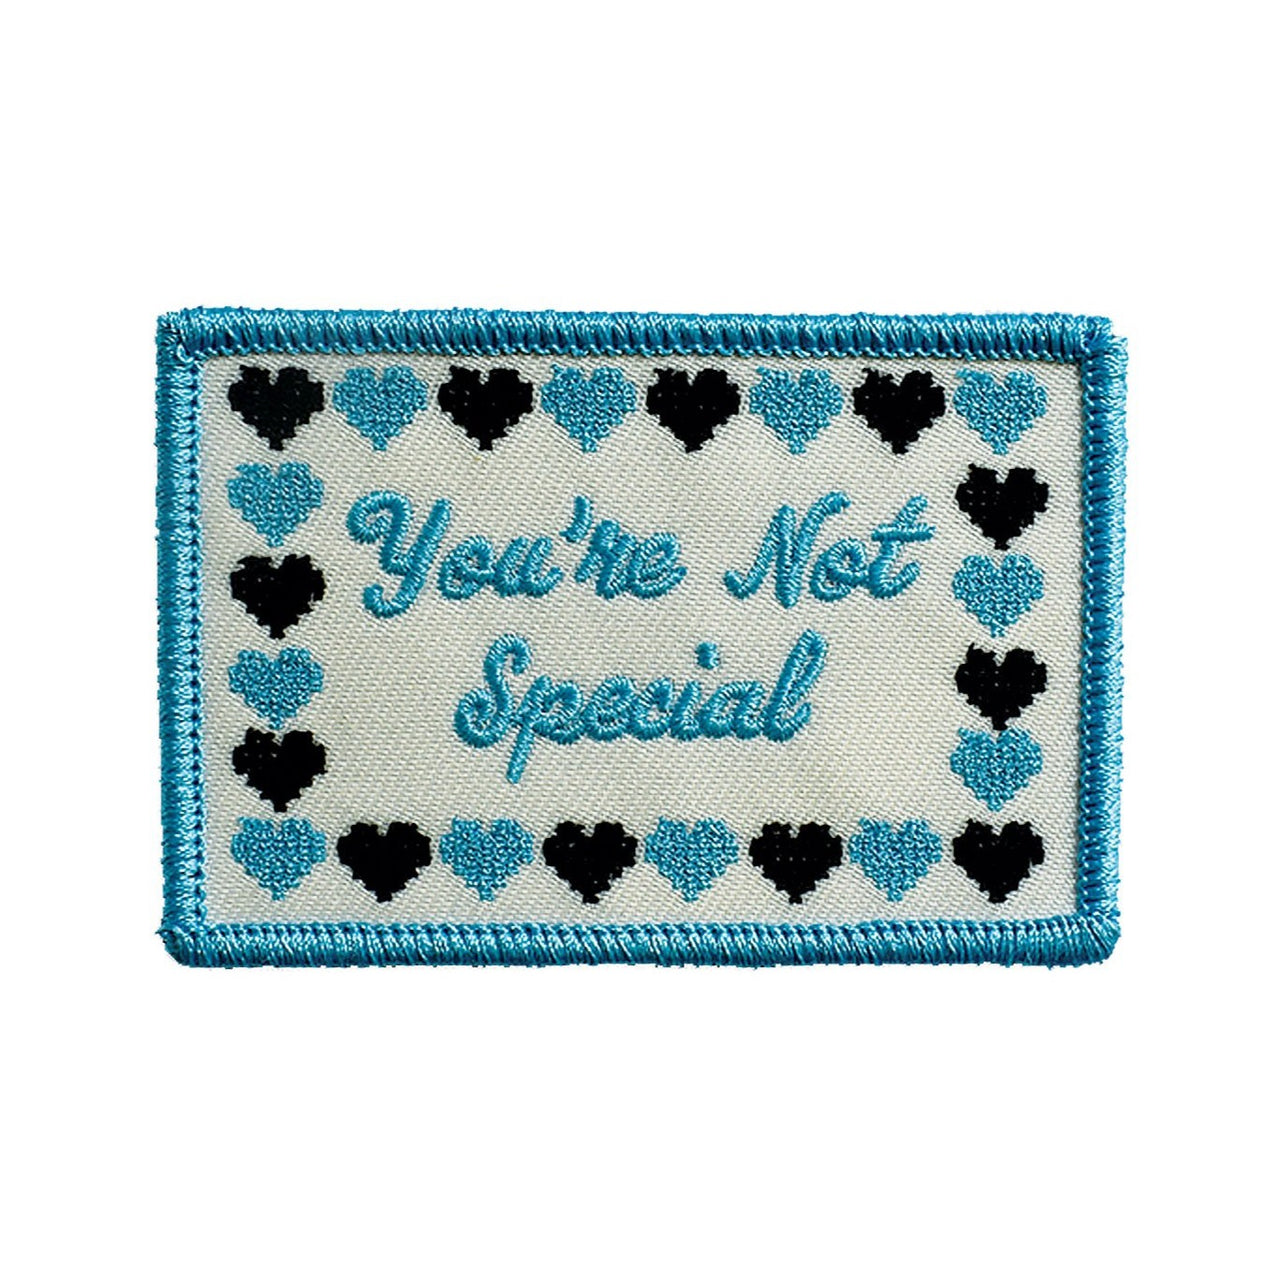 You're Not Special (Iron-On Patch)